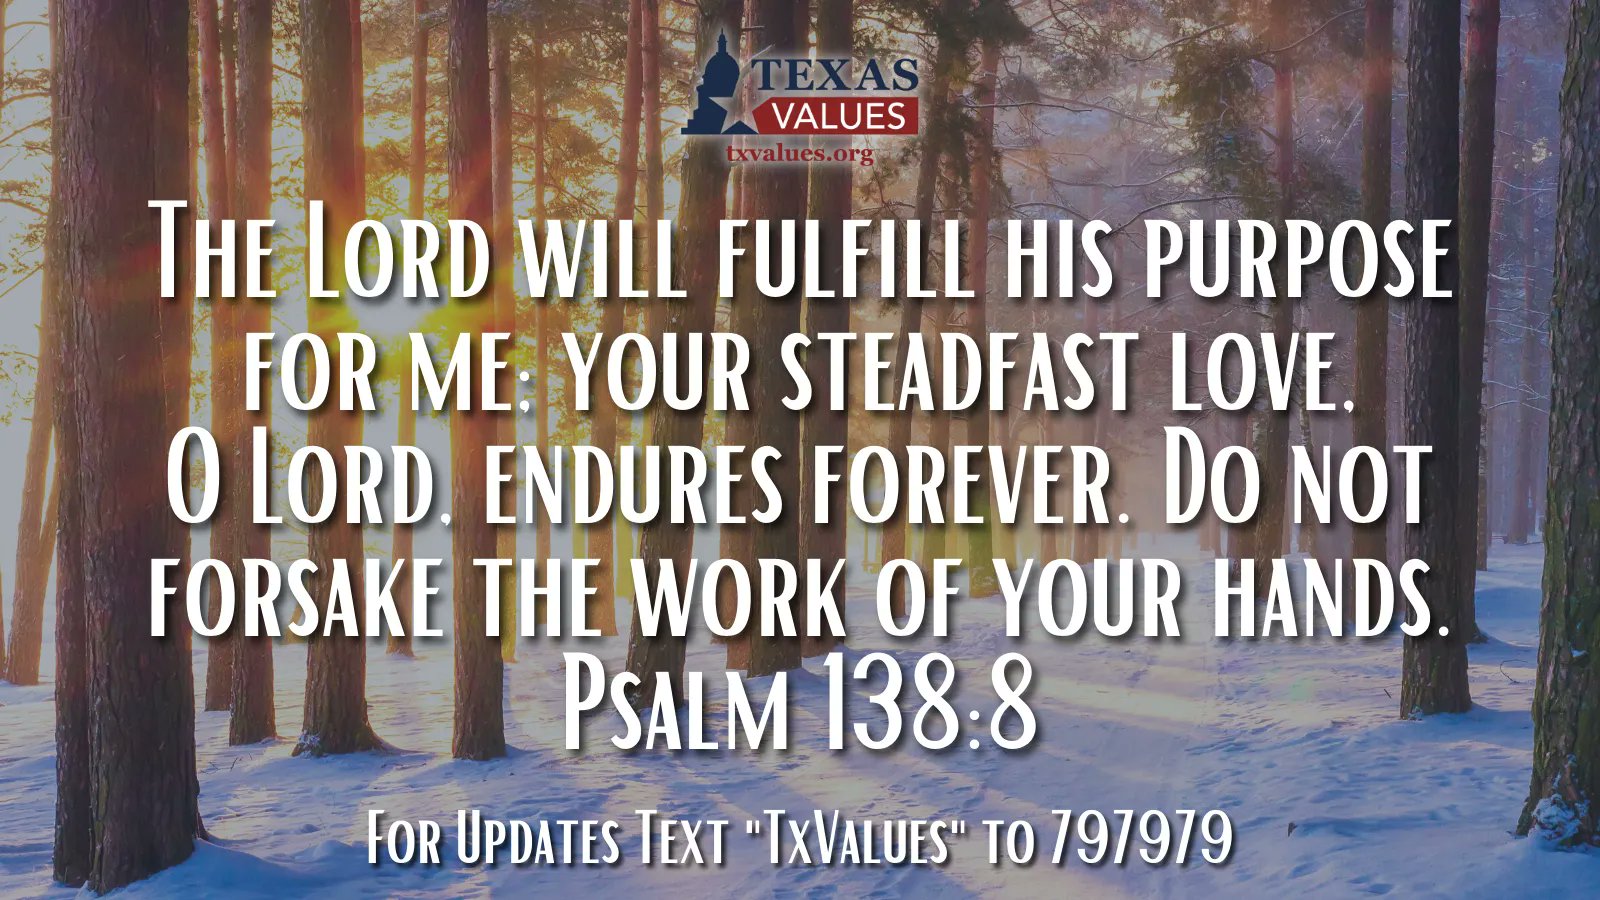 TEXAS VALUES The LOrd wILL fuLfILL HIS purpOSe FOR ME: YOUR STEADFAST LOVE. 0 LOrd: endURES FOREVER. Do NOT ForSake ThE WORK OF YOUR HaNDS. Psalm 138.8 For Updates Text "TxVaLues" To 797979